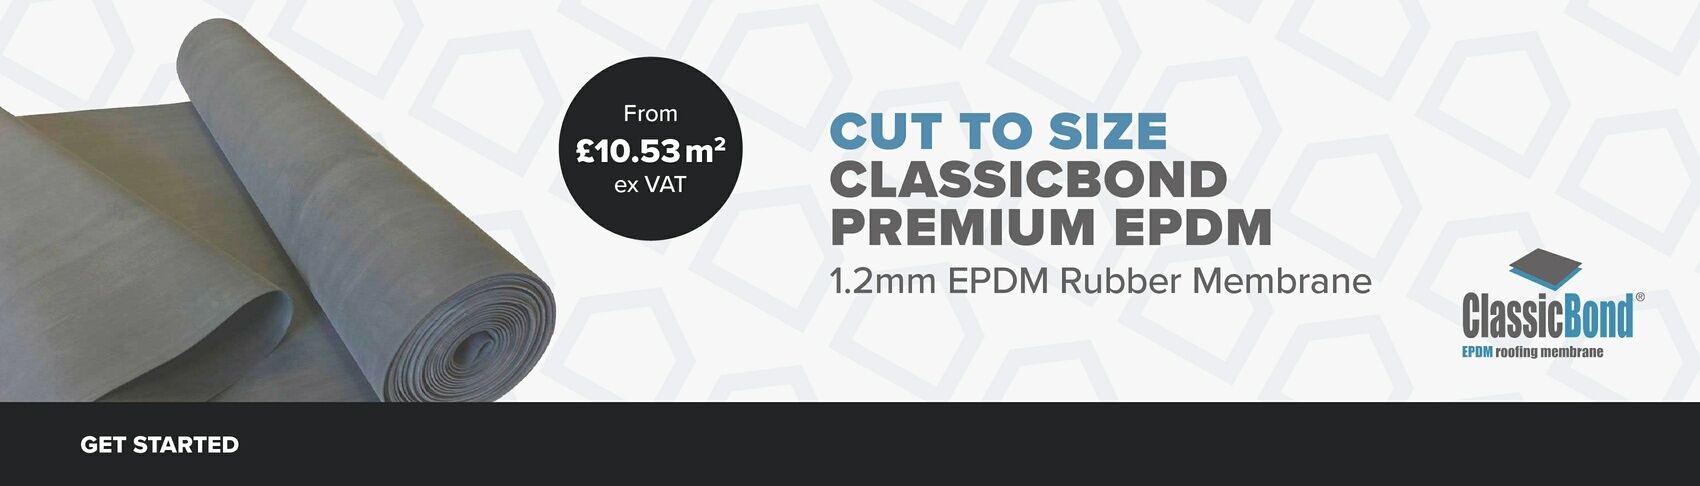 Cut To Size Classicbond EPDM